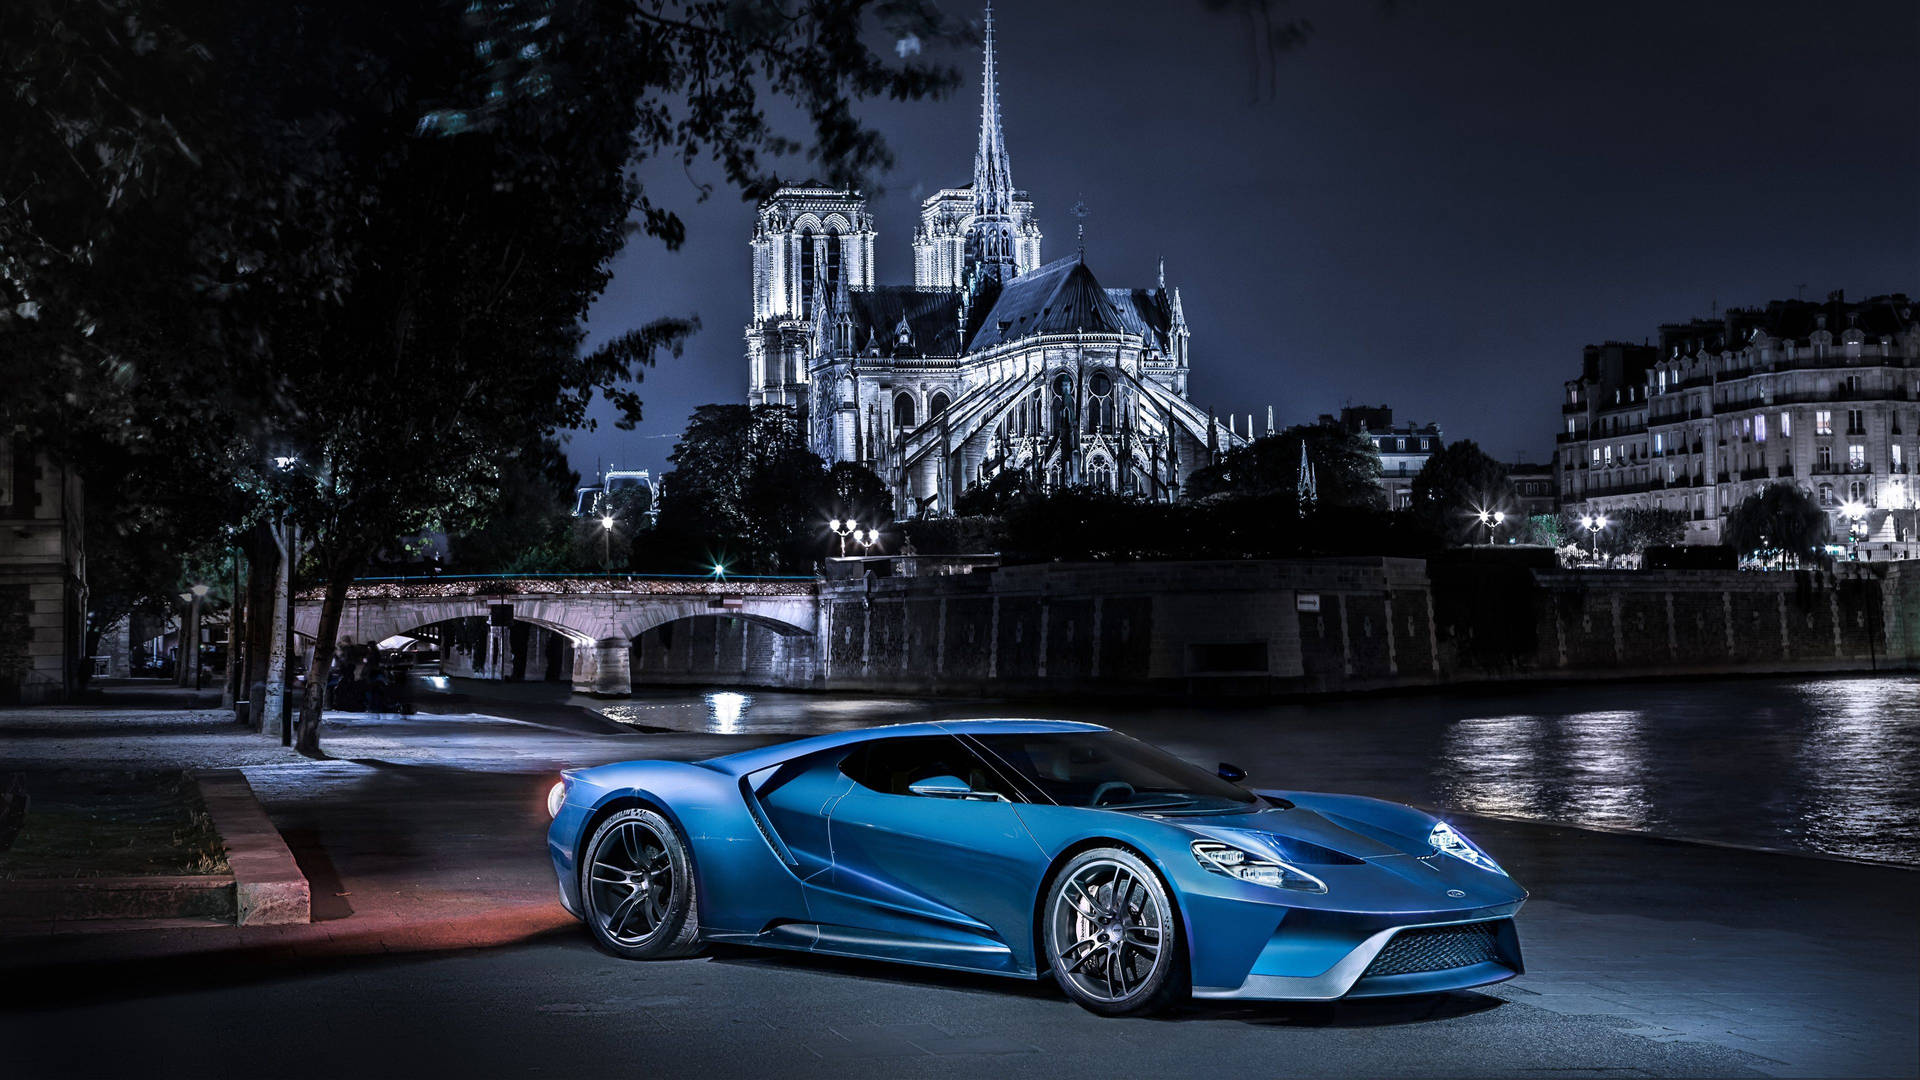 Caption: Majestic Blue Ford Gt Supercar In Its Stunning Glory